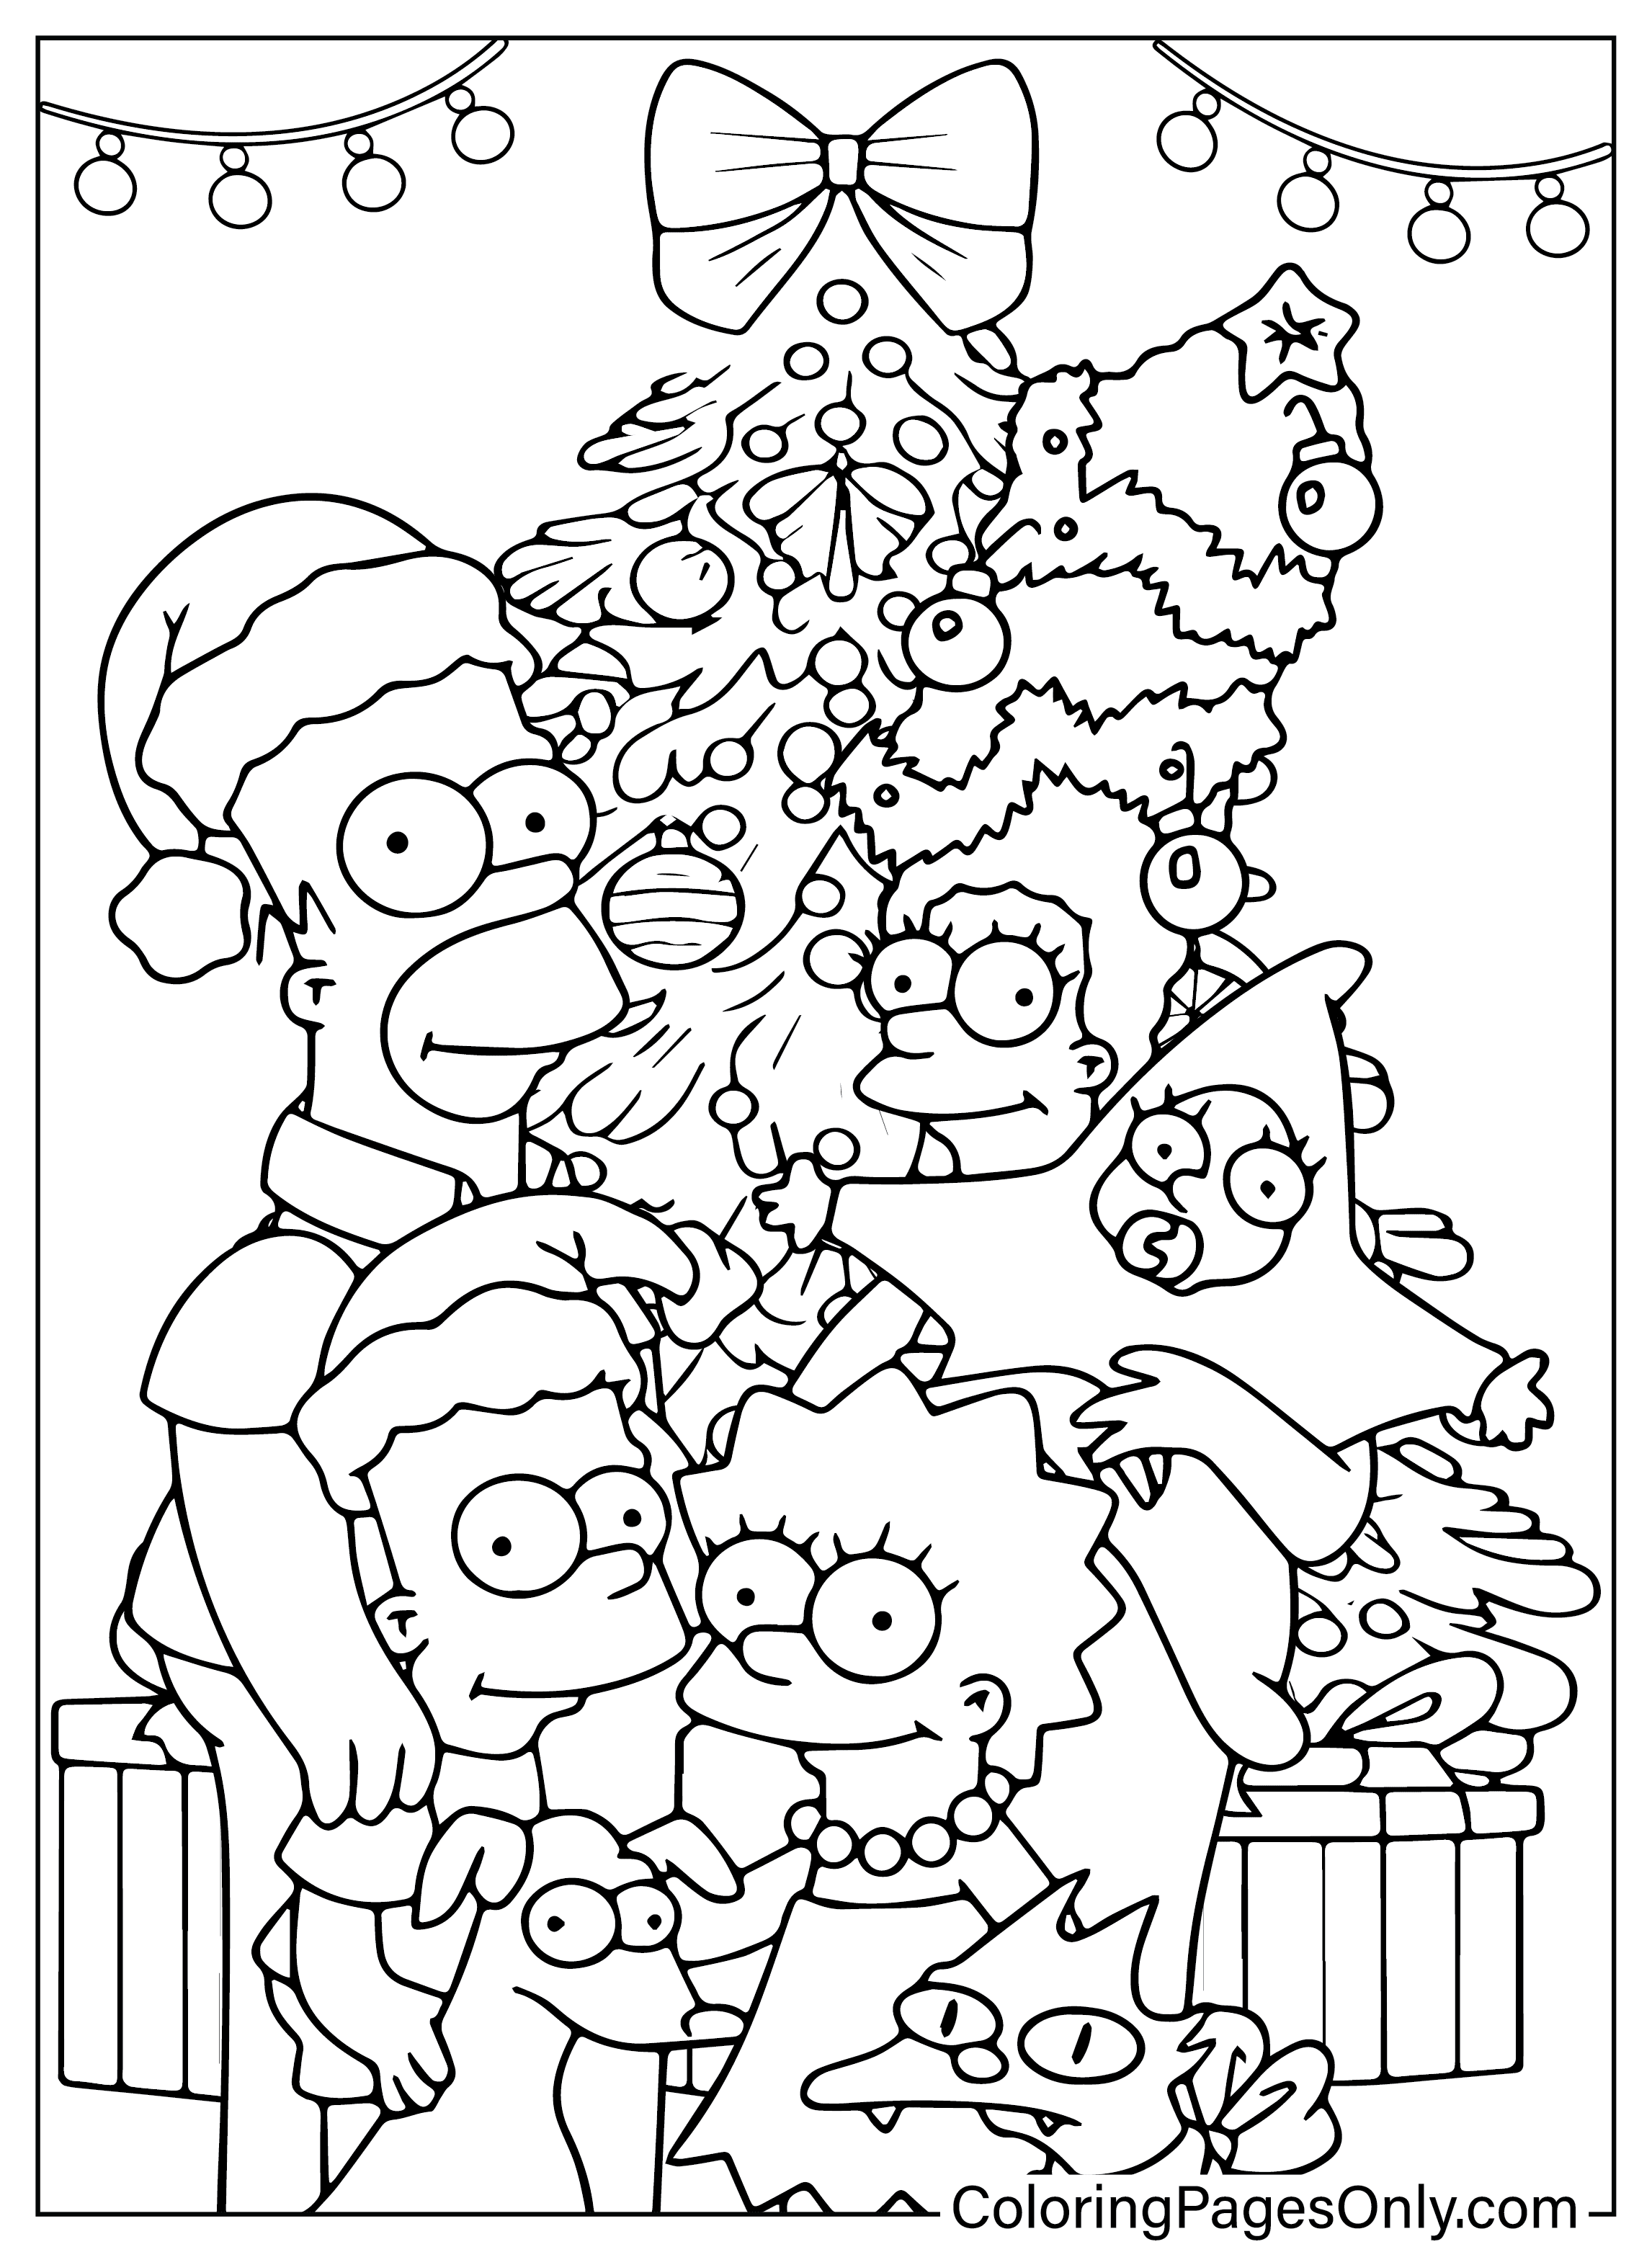 Christmas Simpson Family Coloring Page